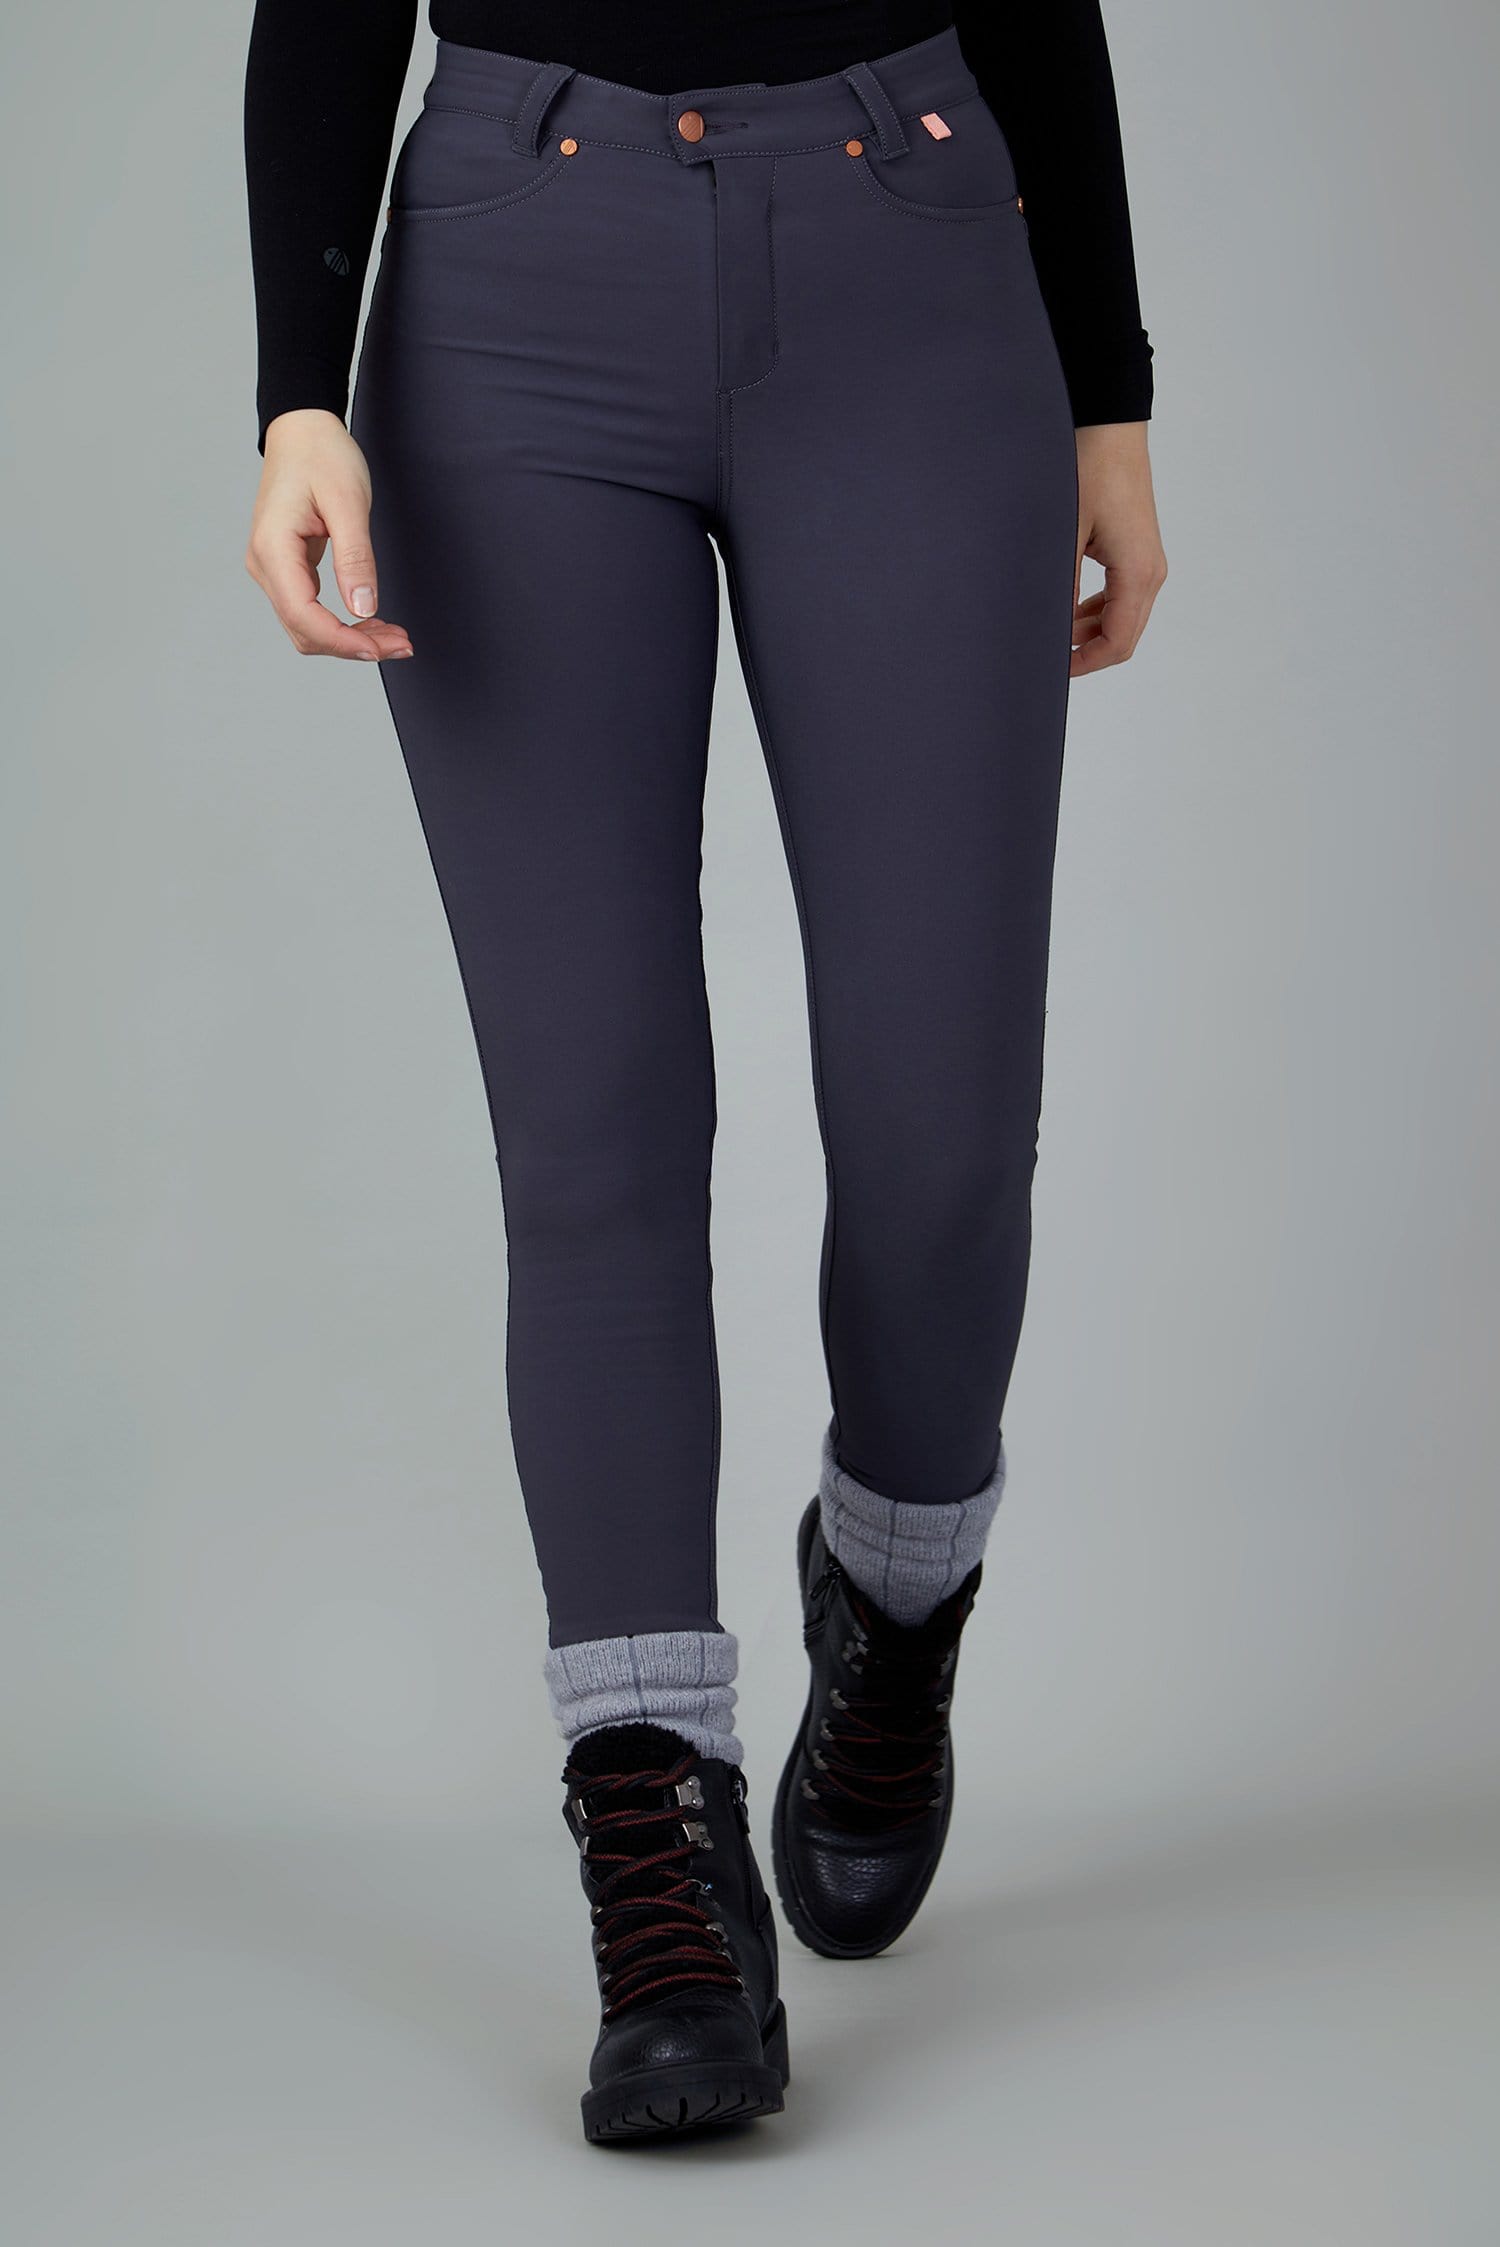 The Aventurite Stretch Skinny Outdoor Trousers - Obsidian - 34r / Uk16 - Womens - Acai Outdoorwear